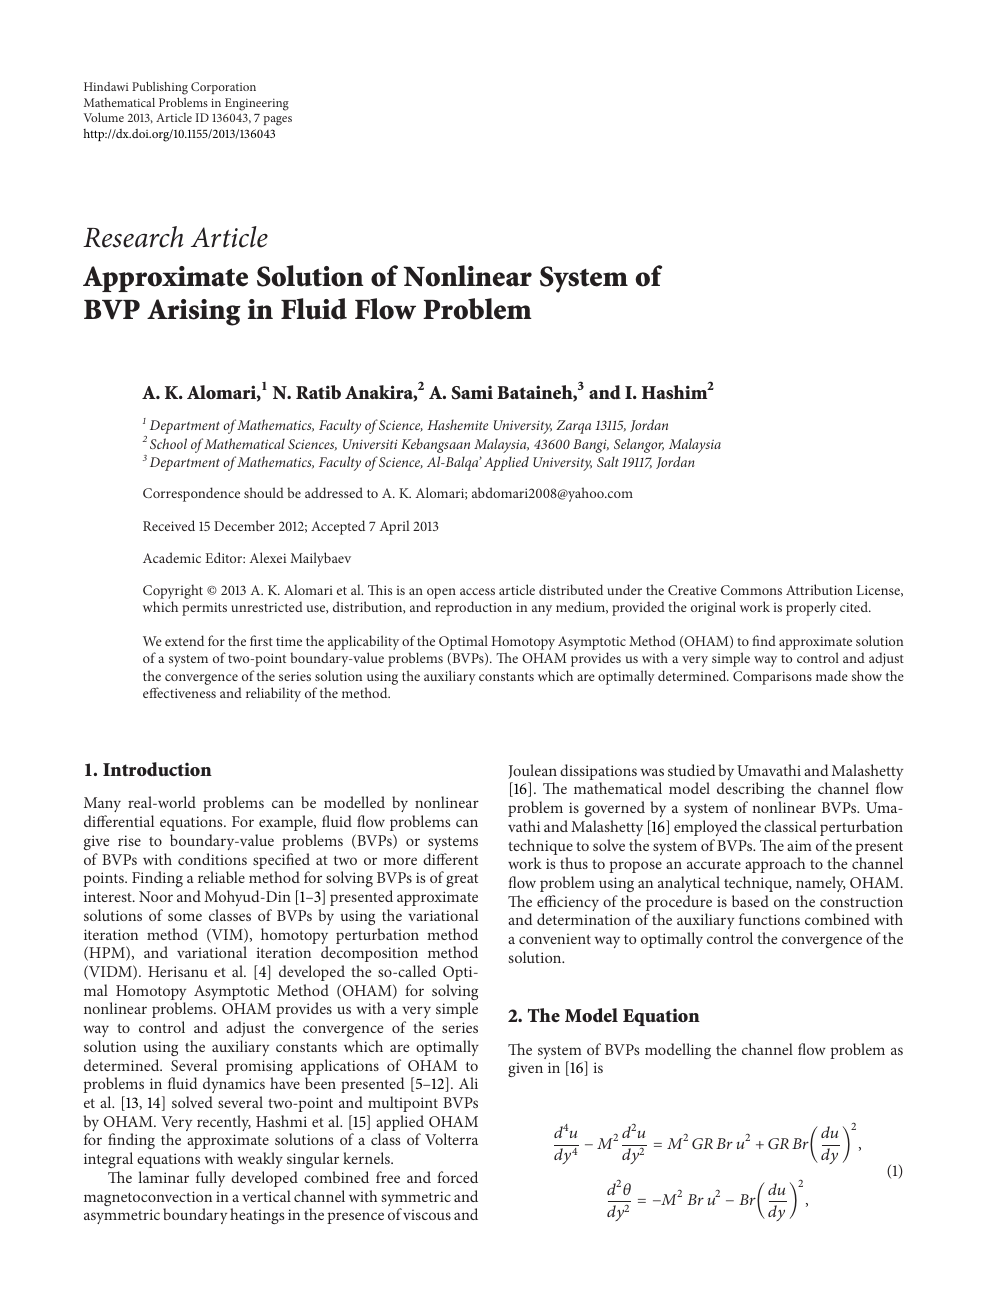 Approximate Solution Of Nonlinear System Of Bvp Arising In Fluid Flow Problem Topic Of Research Paper In Mathematics Download Scholarly Article Pdf And Read For Free On Cyberleninka Open Science Hub